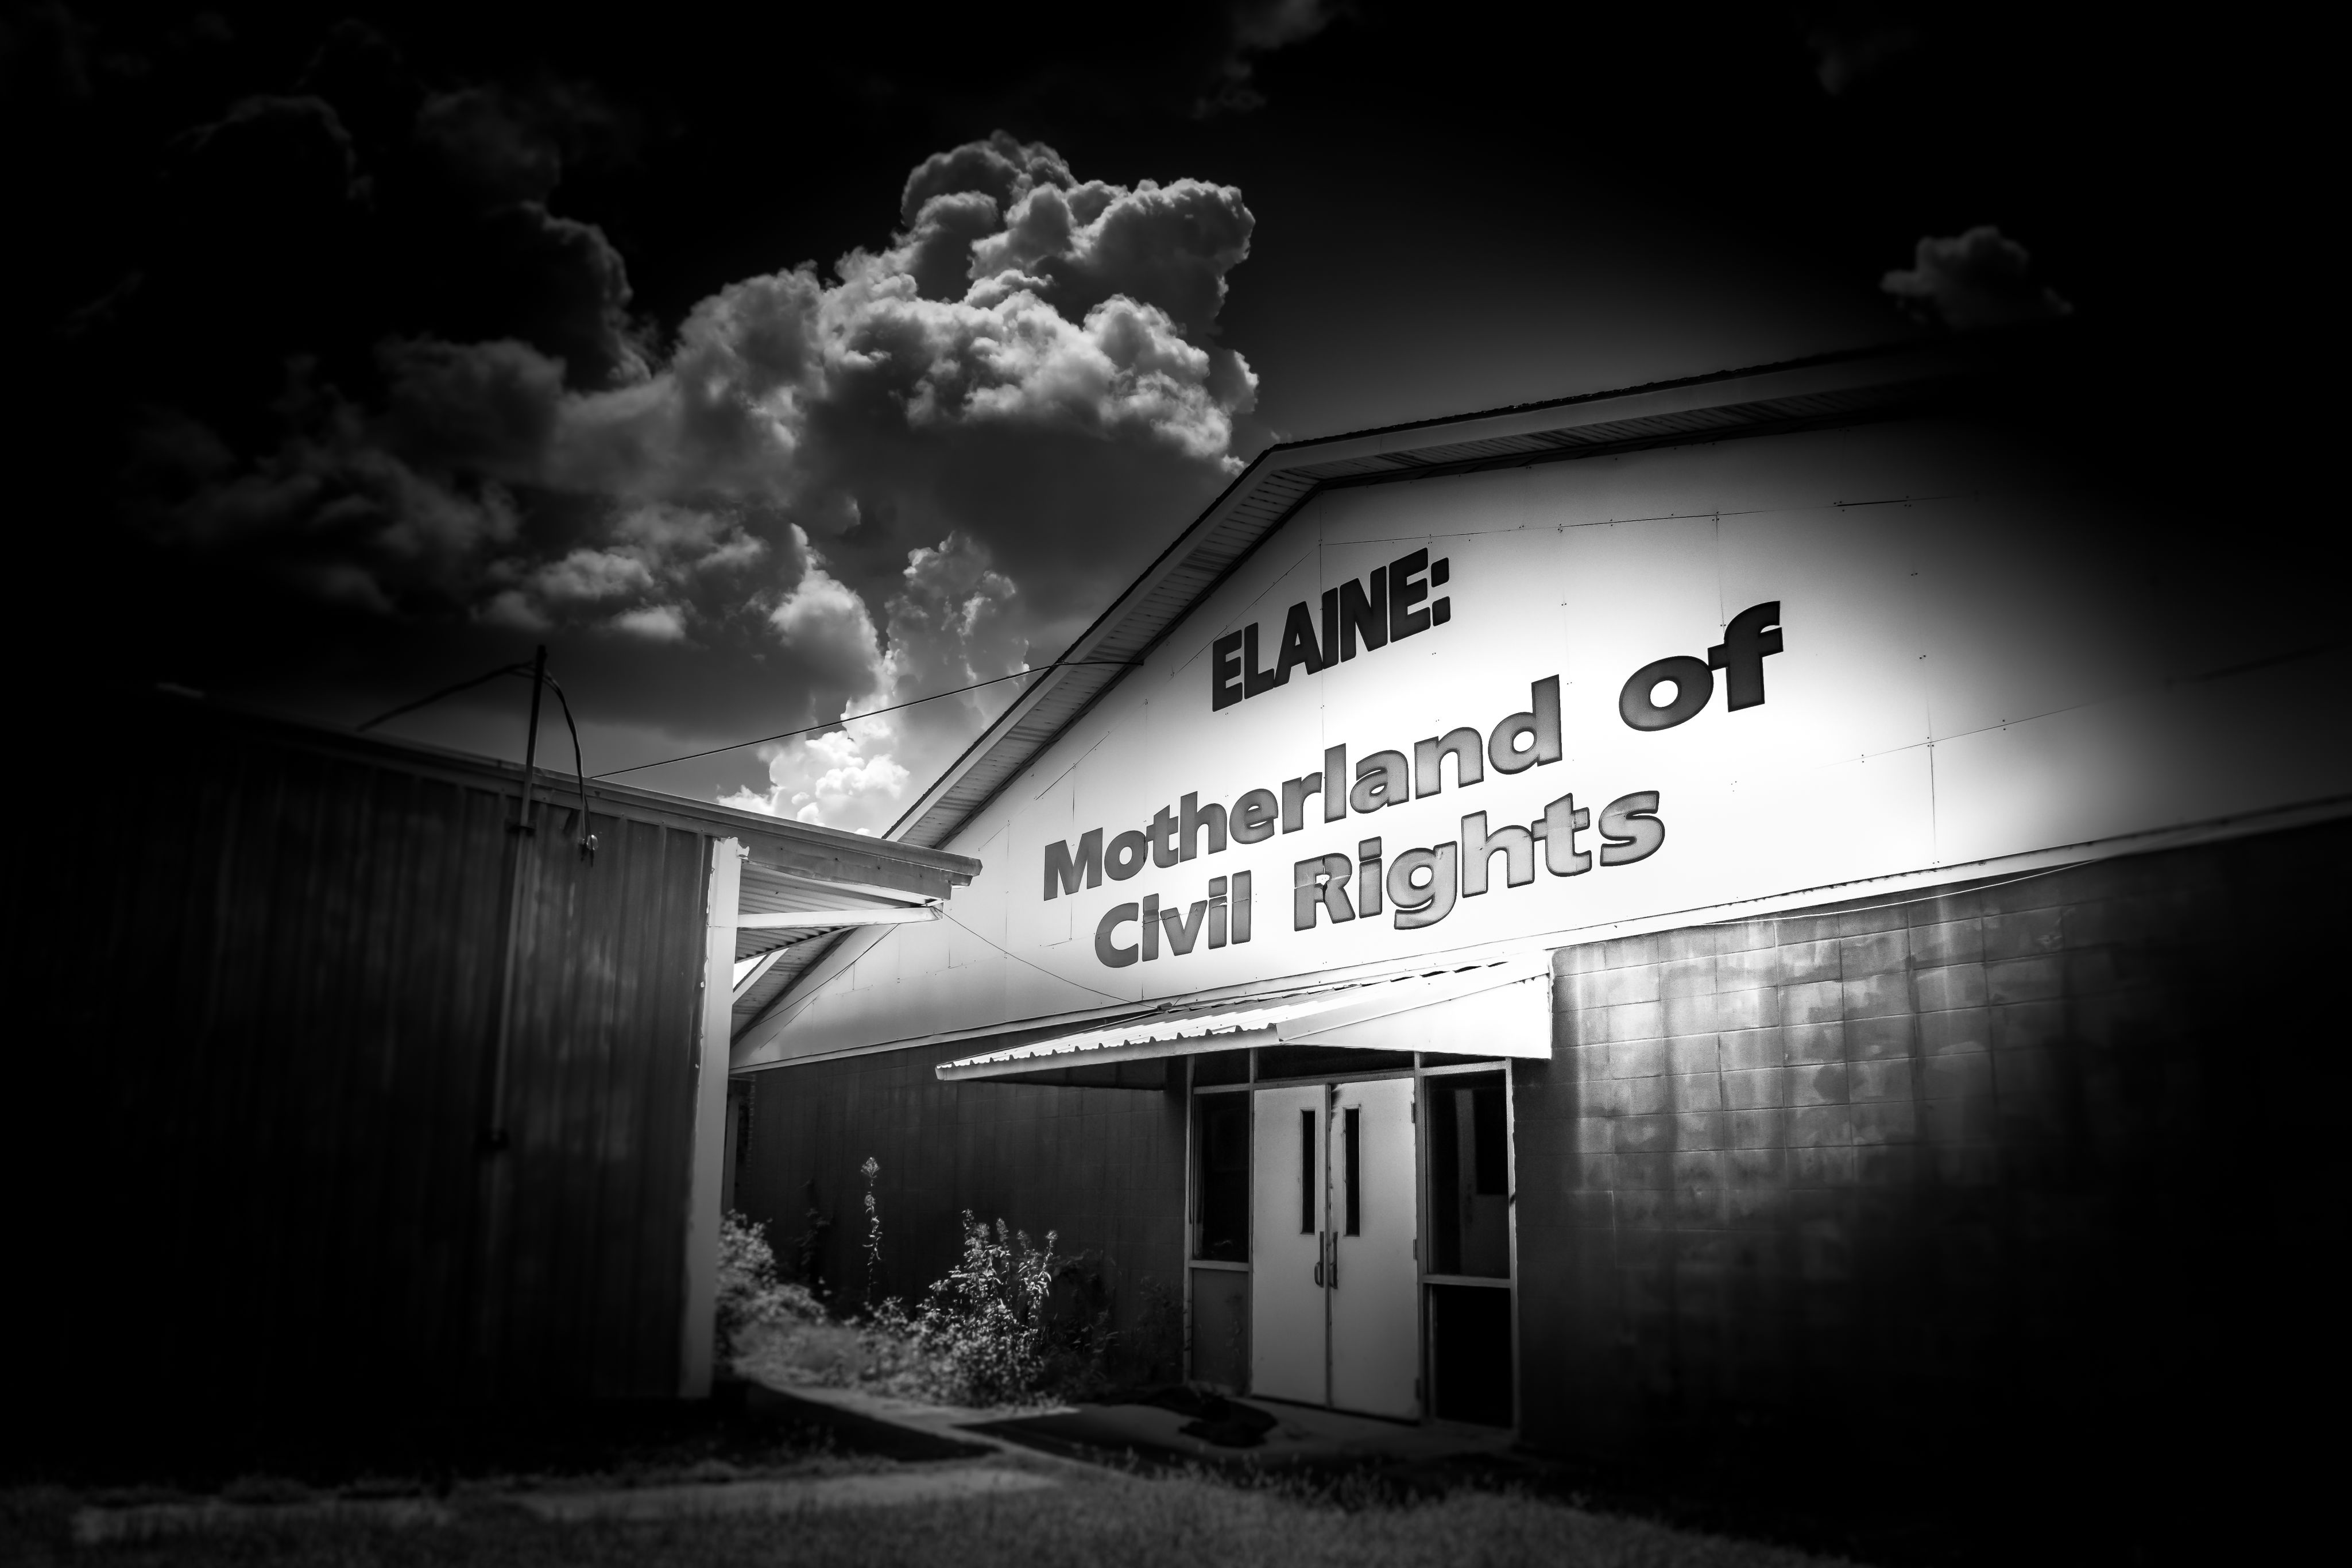 Black and white photo of the side of a building with a sign that says Elaine: Motherland of Civil Rights